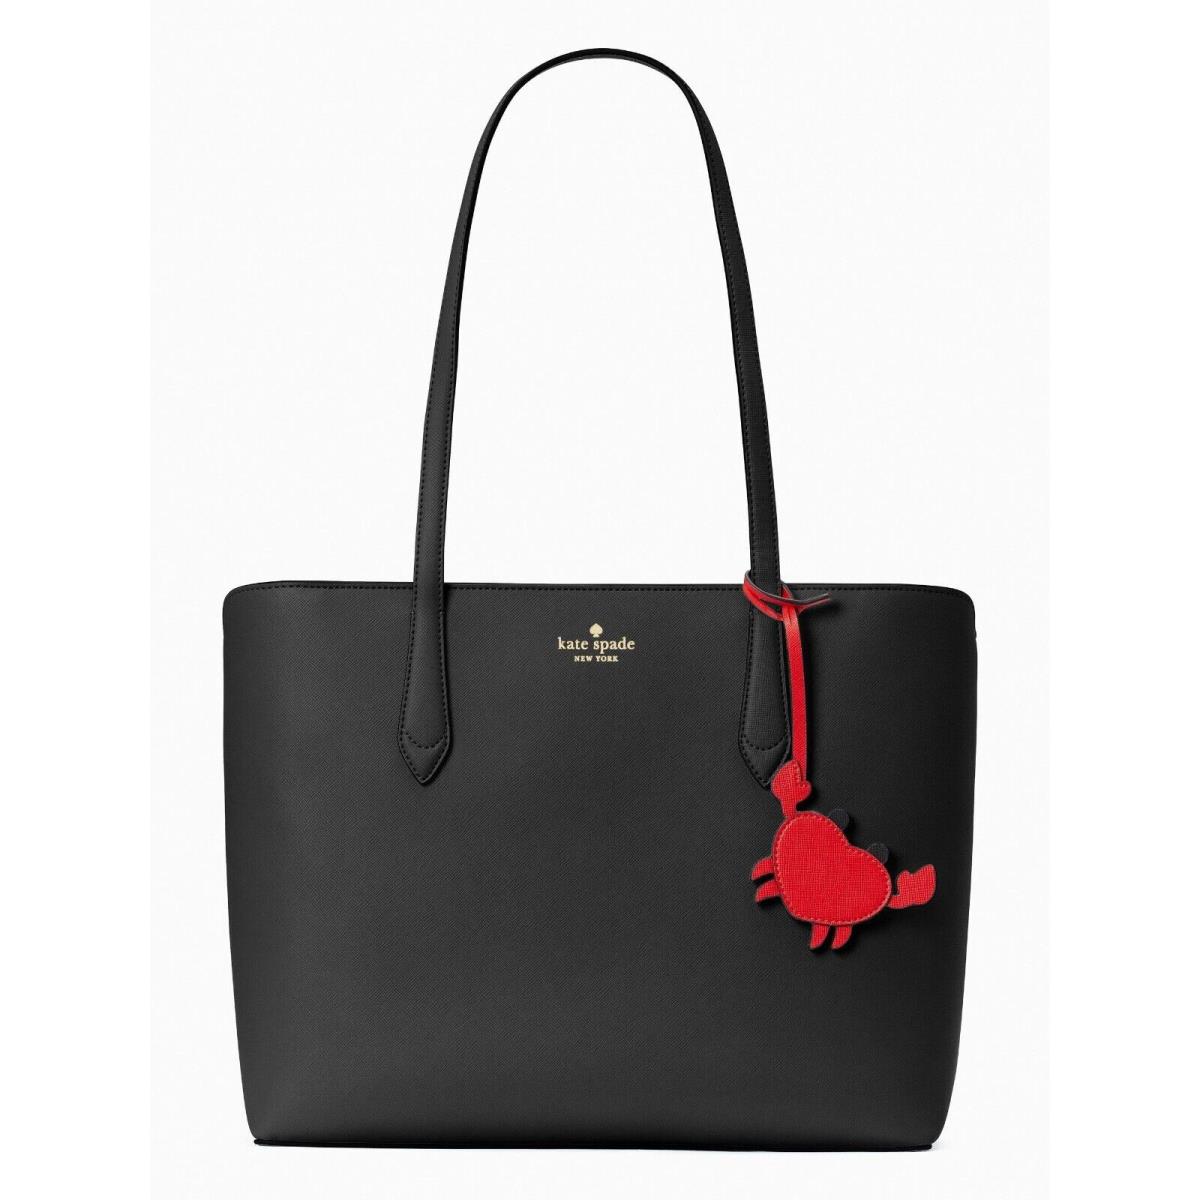 New Kate Spade Marlee Tote Saffiano Black with Red Crab Charm - Exterior: Black